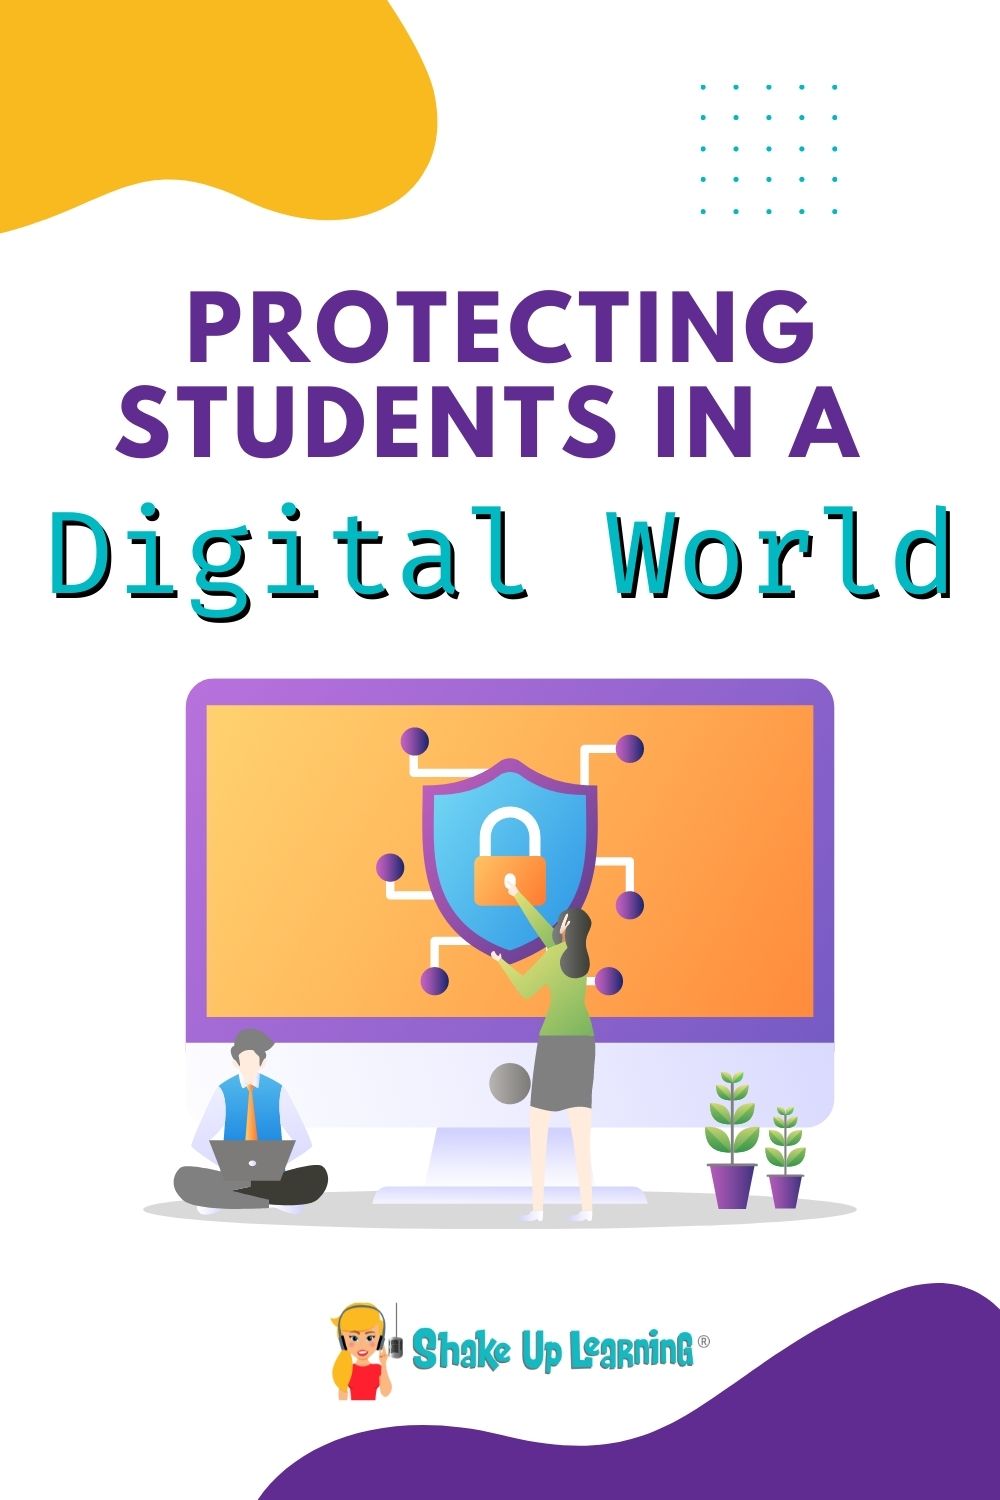 In this episode, Kasey chats with Noted education technology author, podcast host and edtech CEO, Al Kingsley. Kasey and Al discuss how to protect students online and the ever-growing need for digital citizenship skills. 